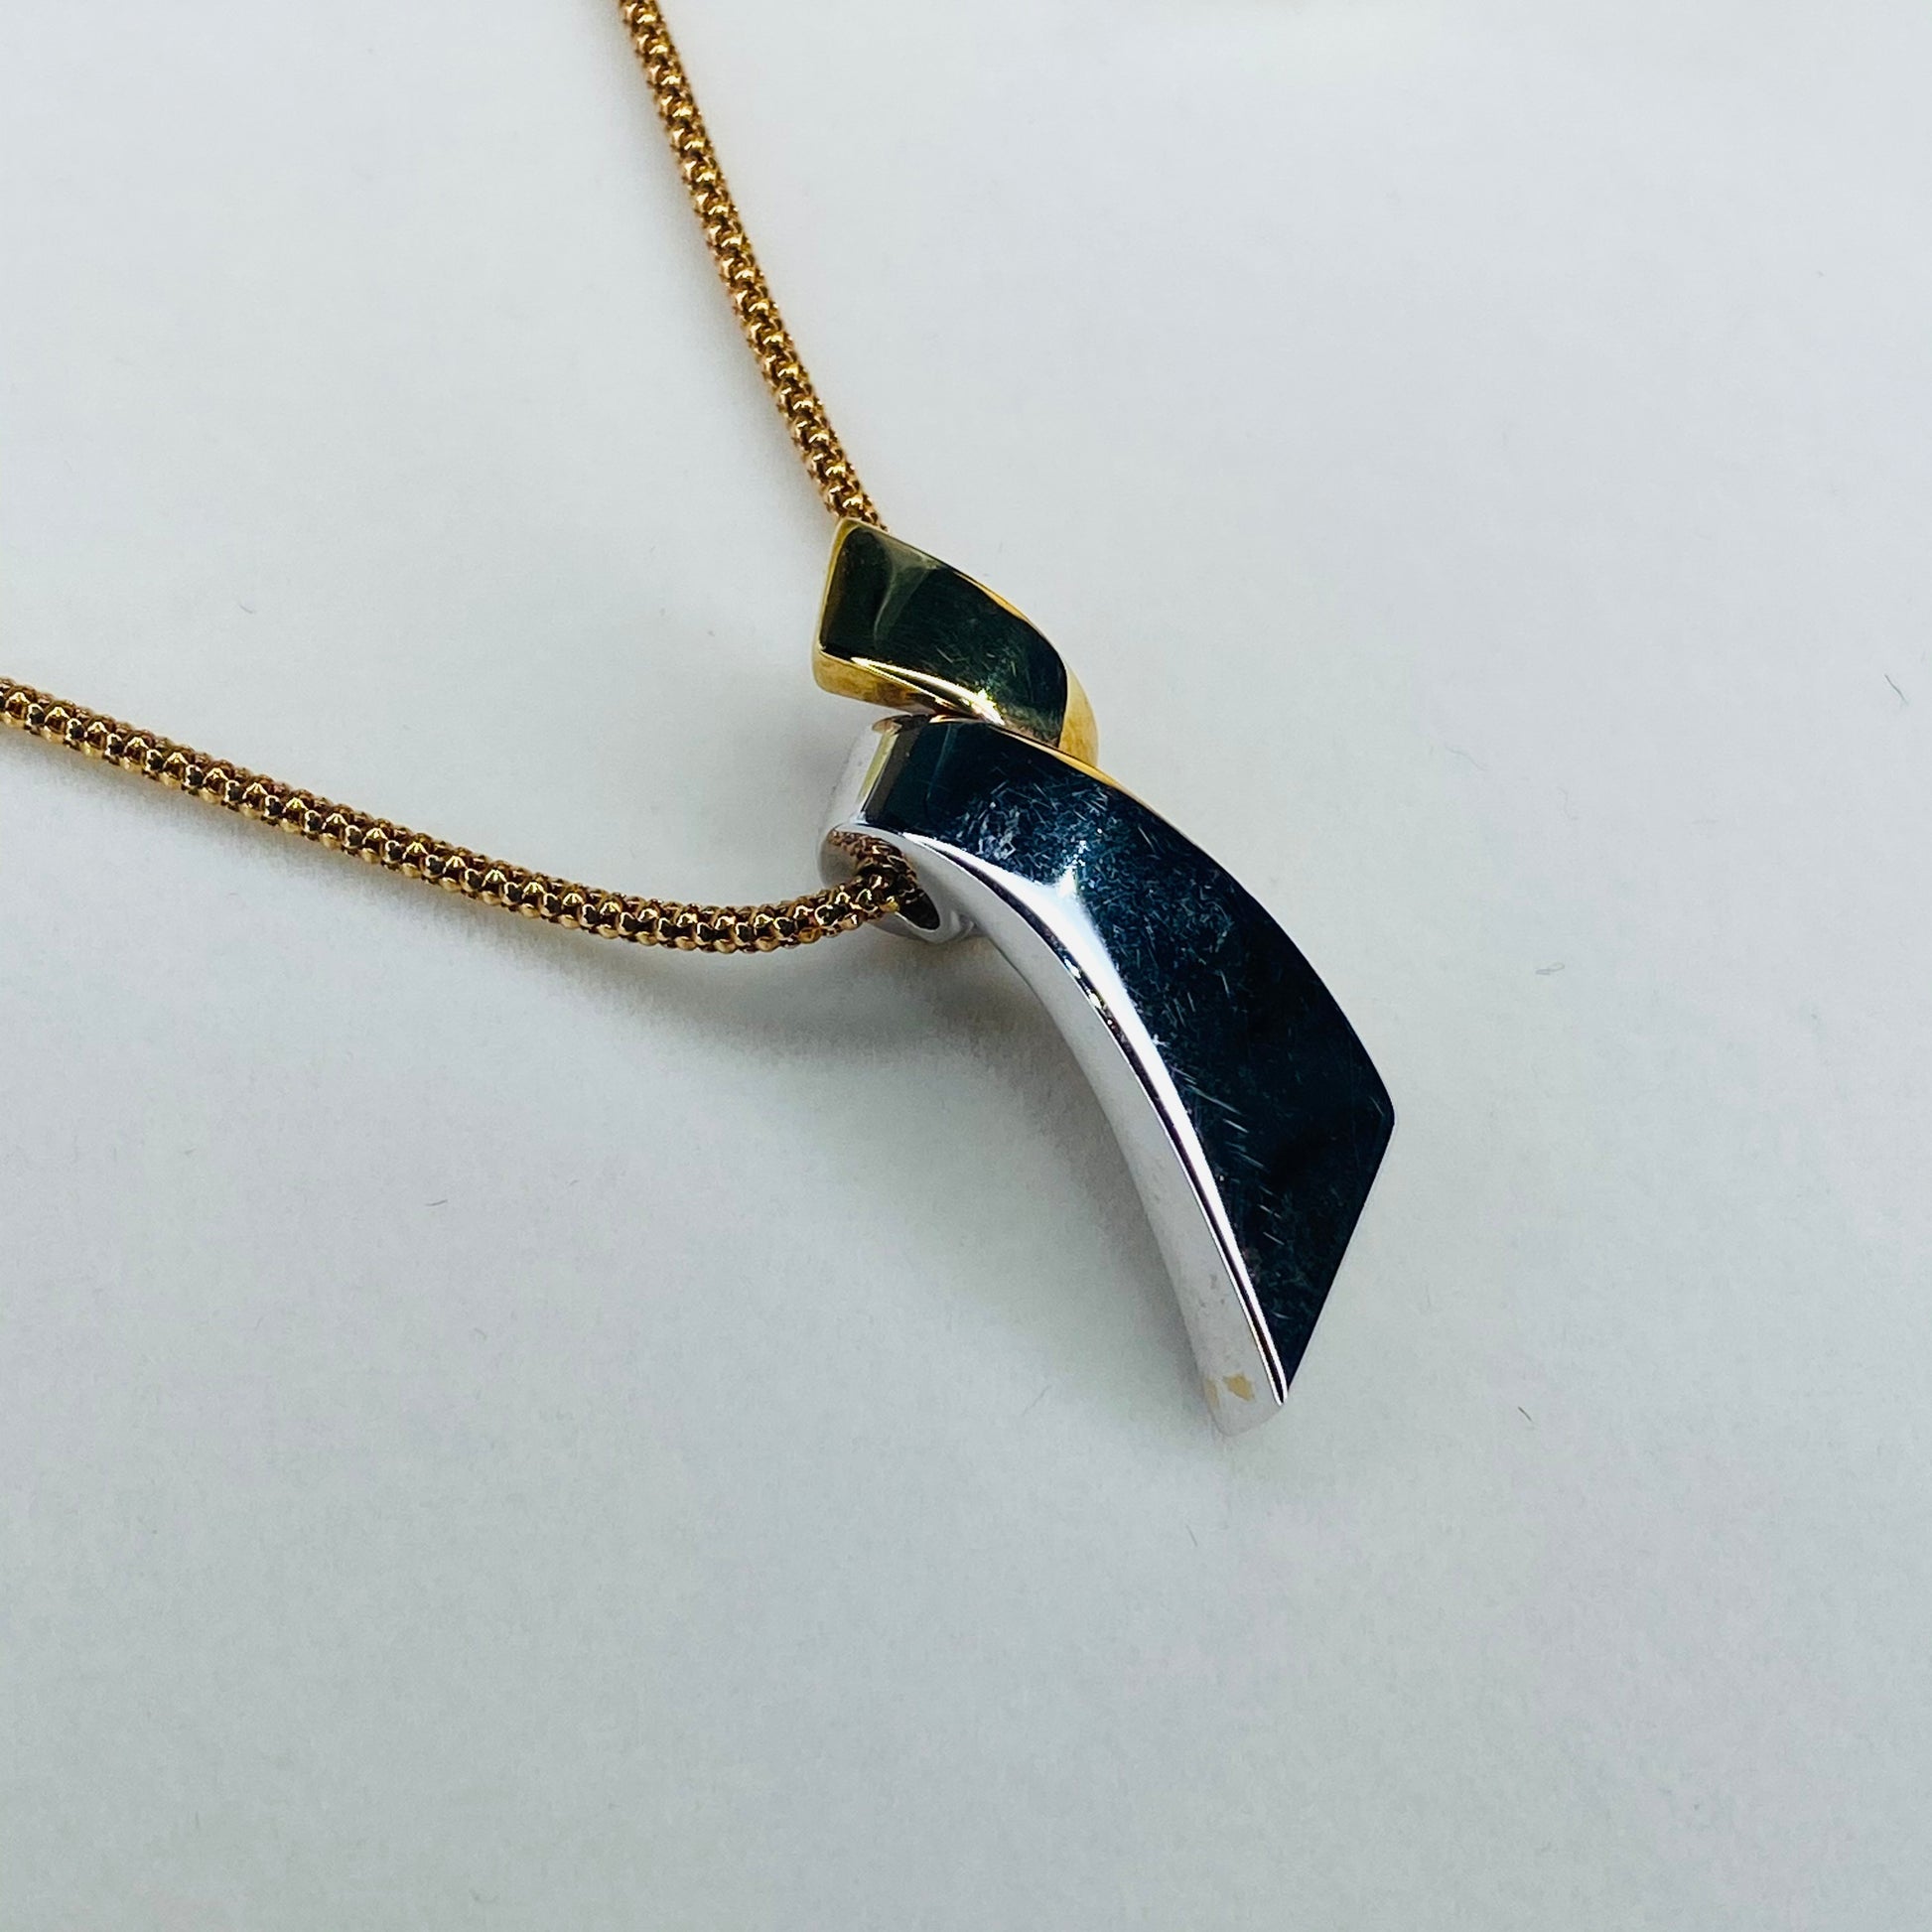 18ct Gold Two Tone Pendant Necklace - John Ross Jewellers